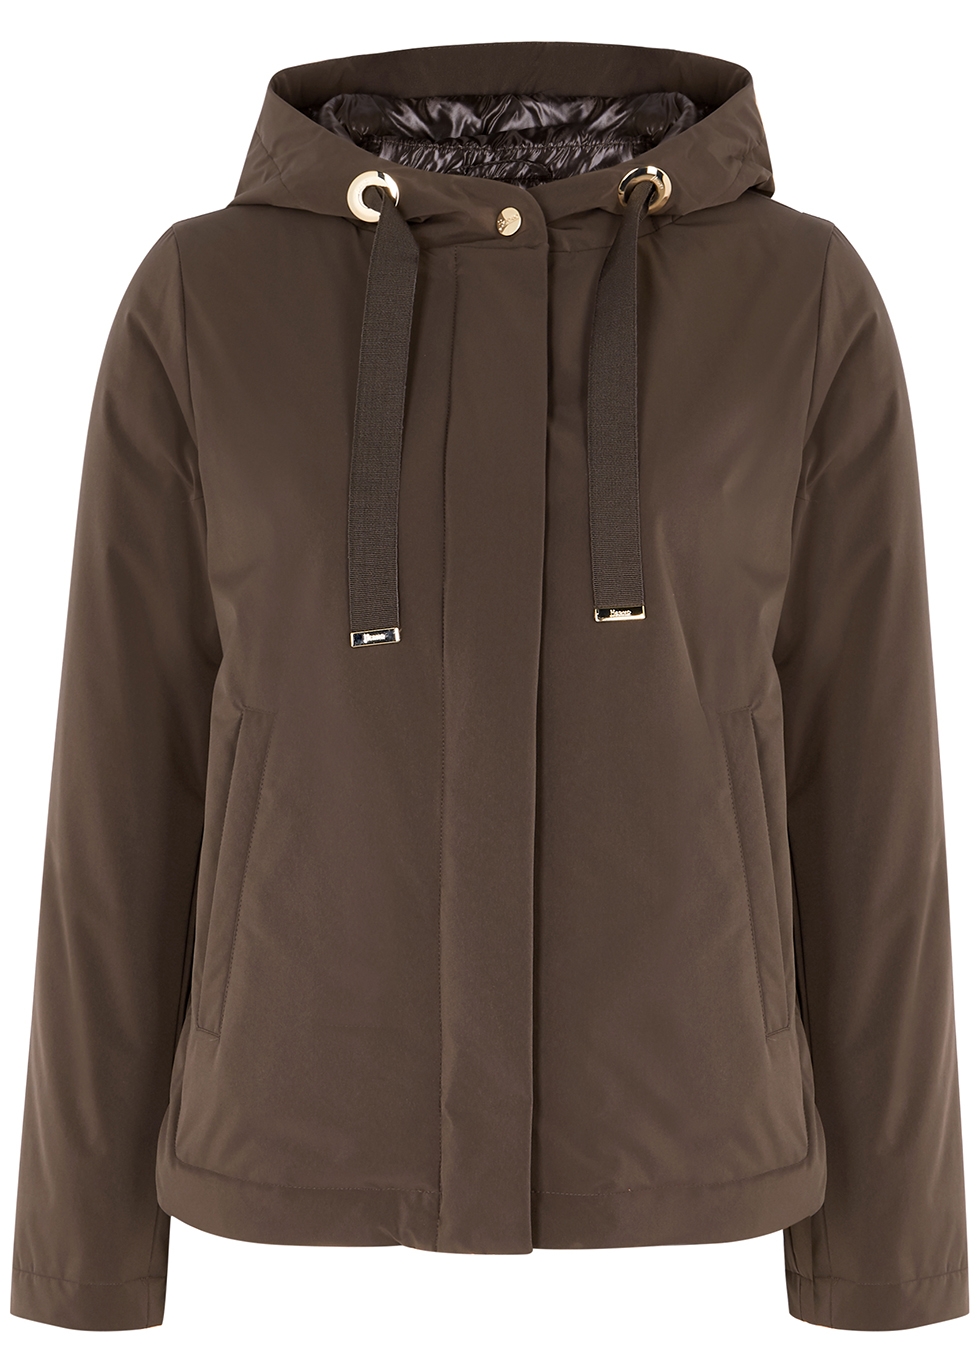 Travel brown shell jacket